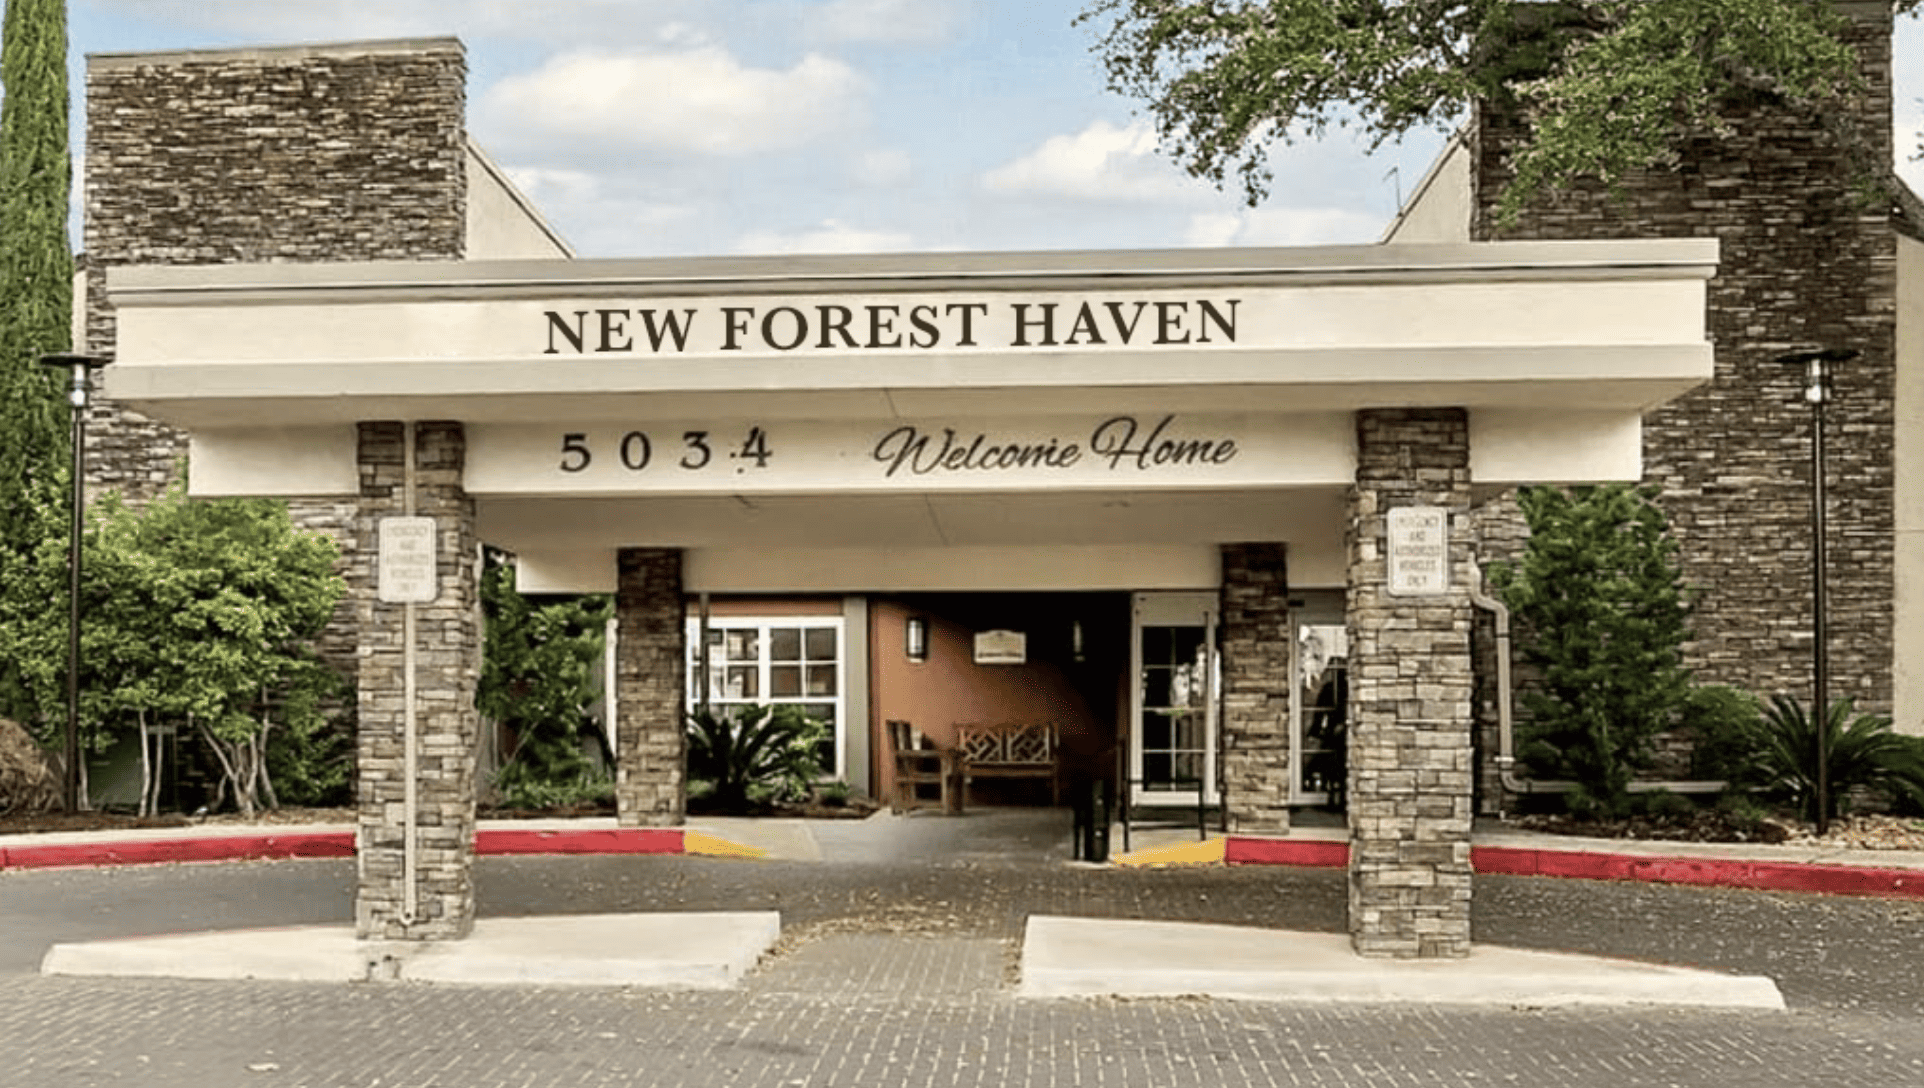 The front entrance of New Forest Haven.